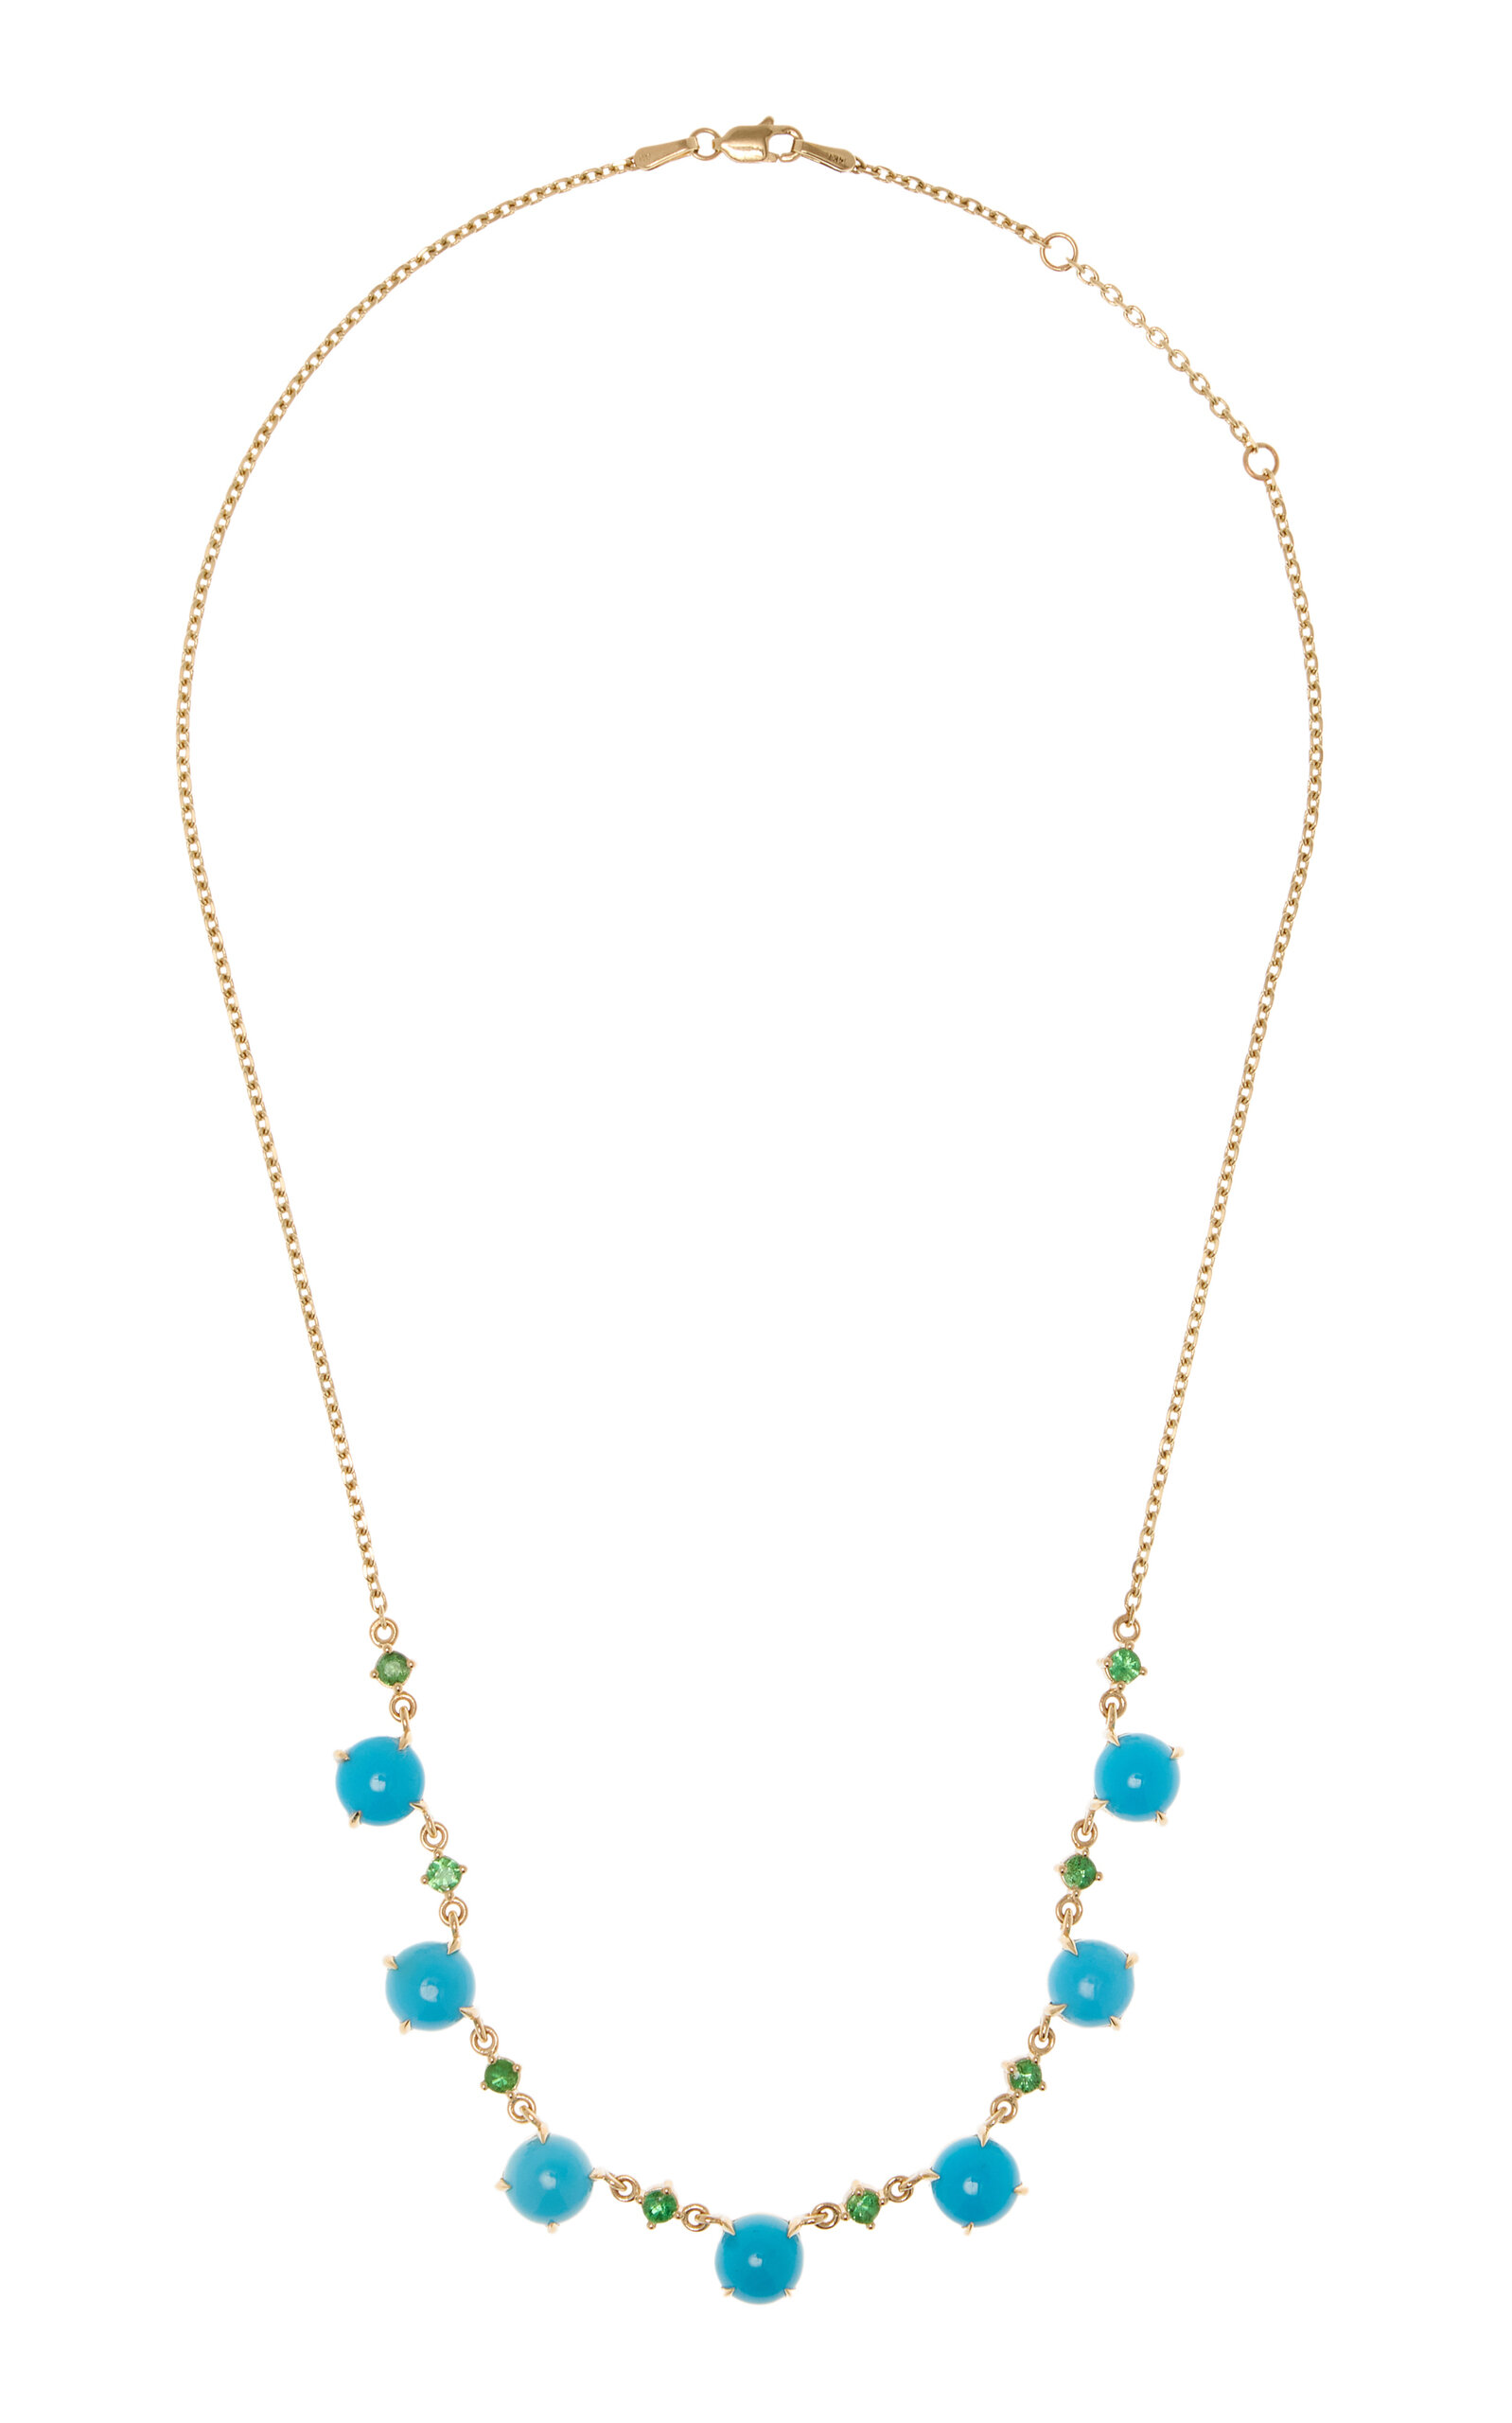 M.spalten Women's 7 Stone Lady 14k Yellow Gold; Tsavorite; And Turquoise Necklace In Blue